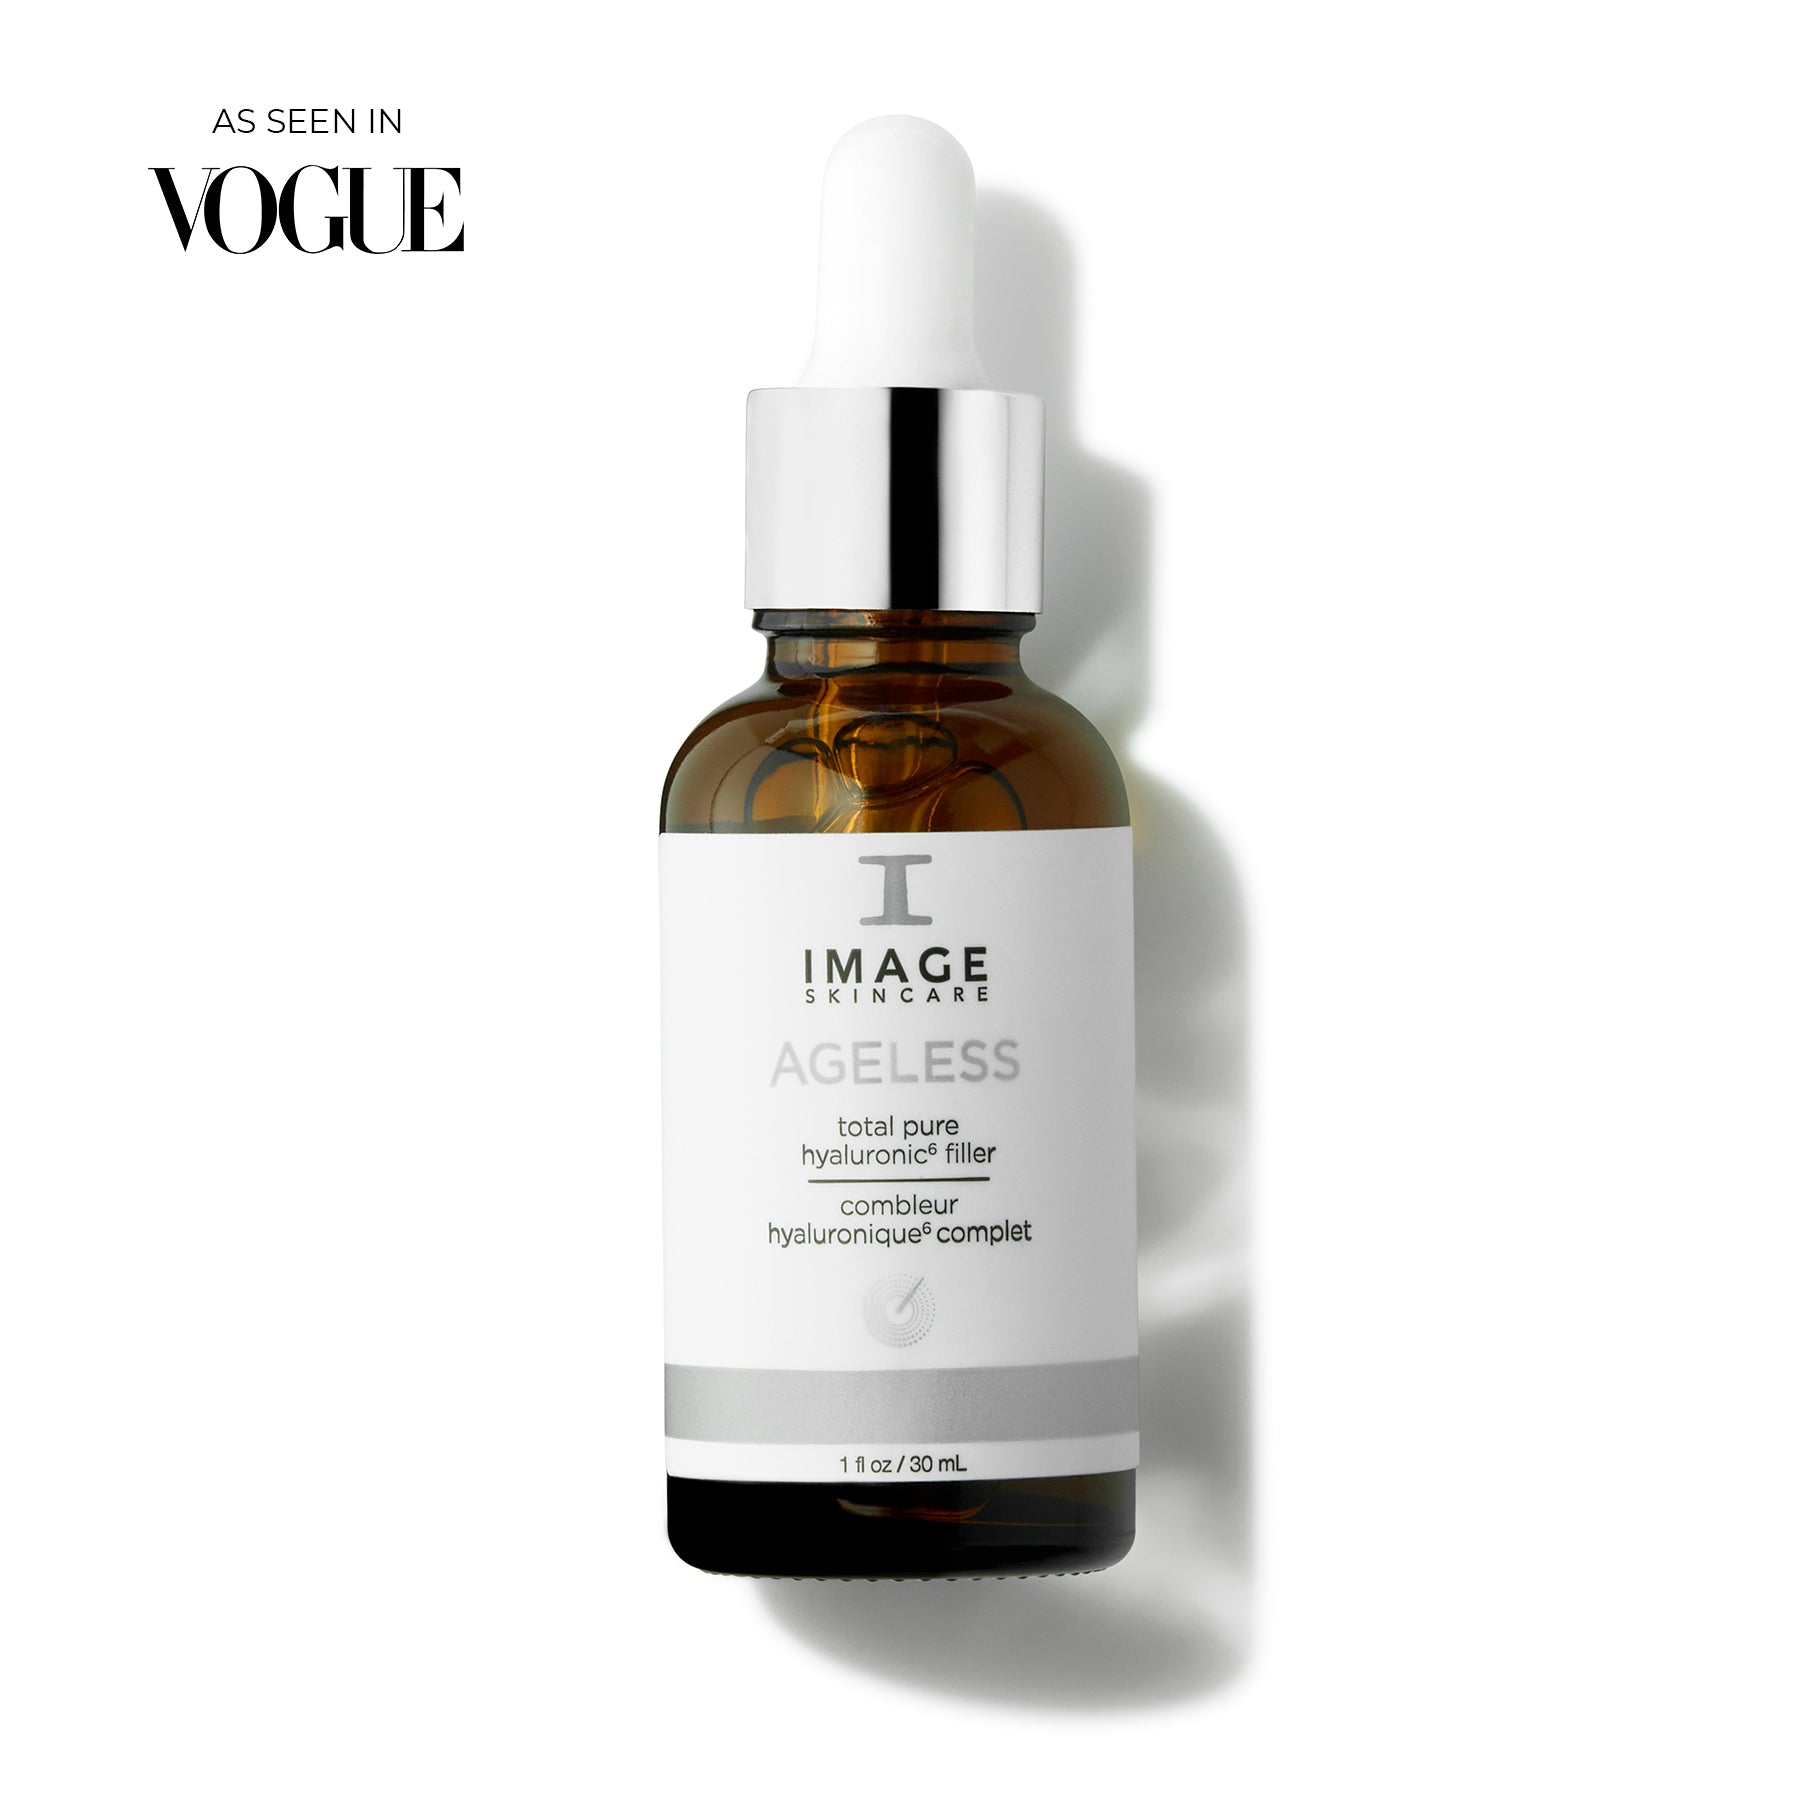 As seen in Vogue, Image Skincare AGELESS total pure hyaluronic acid serum.